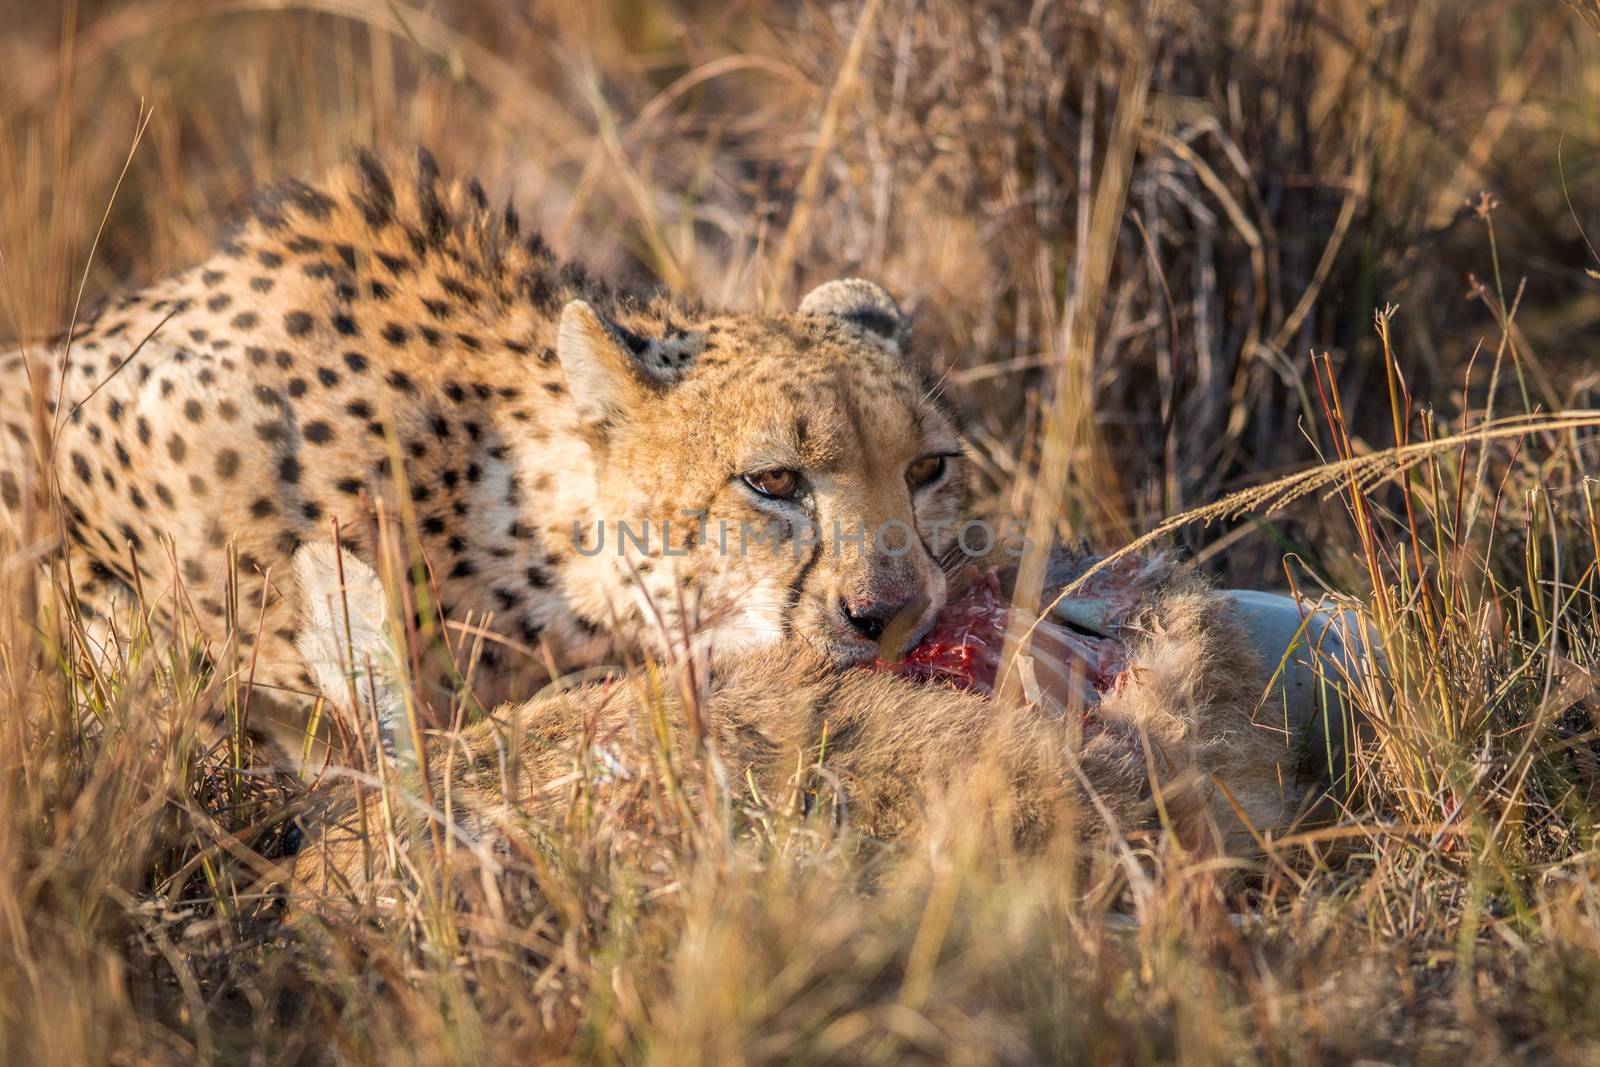 Cheetah eating from a Reedbuck carcass in Kruger. by Simoneemanphotography